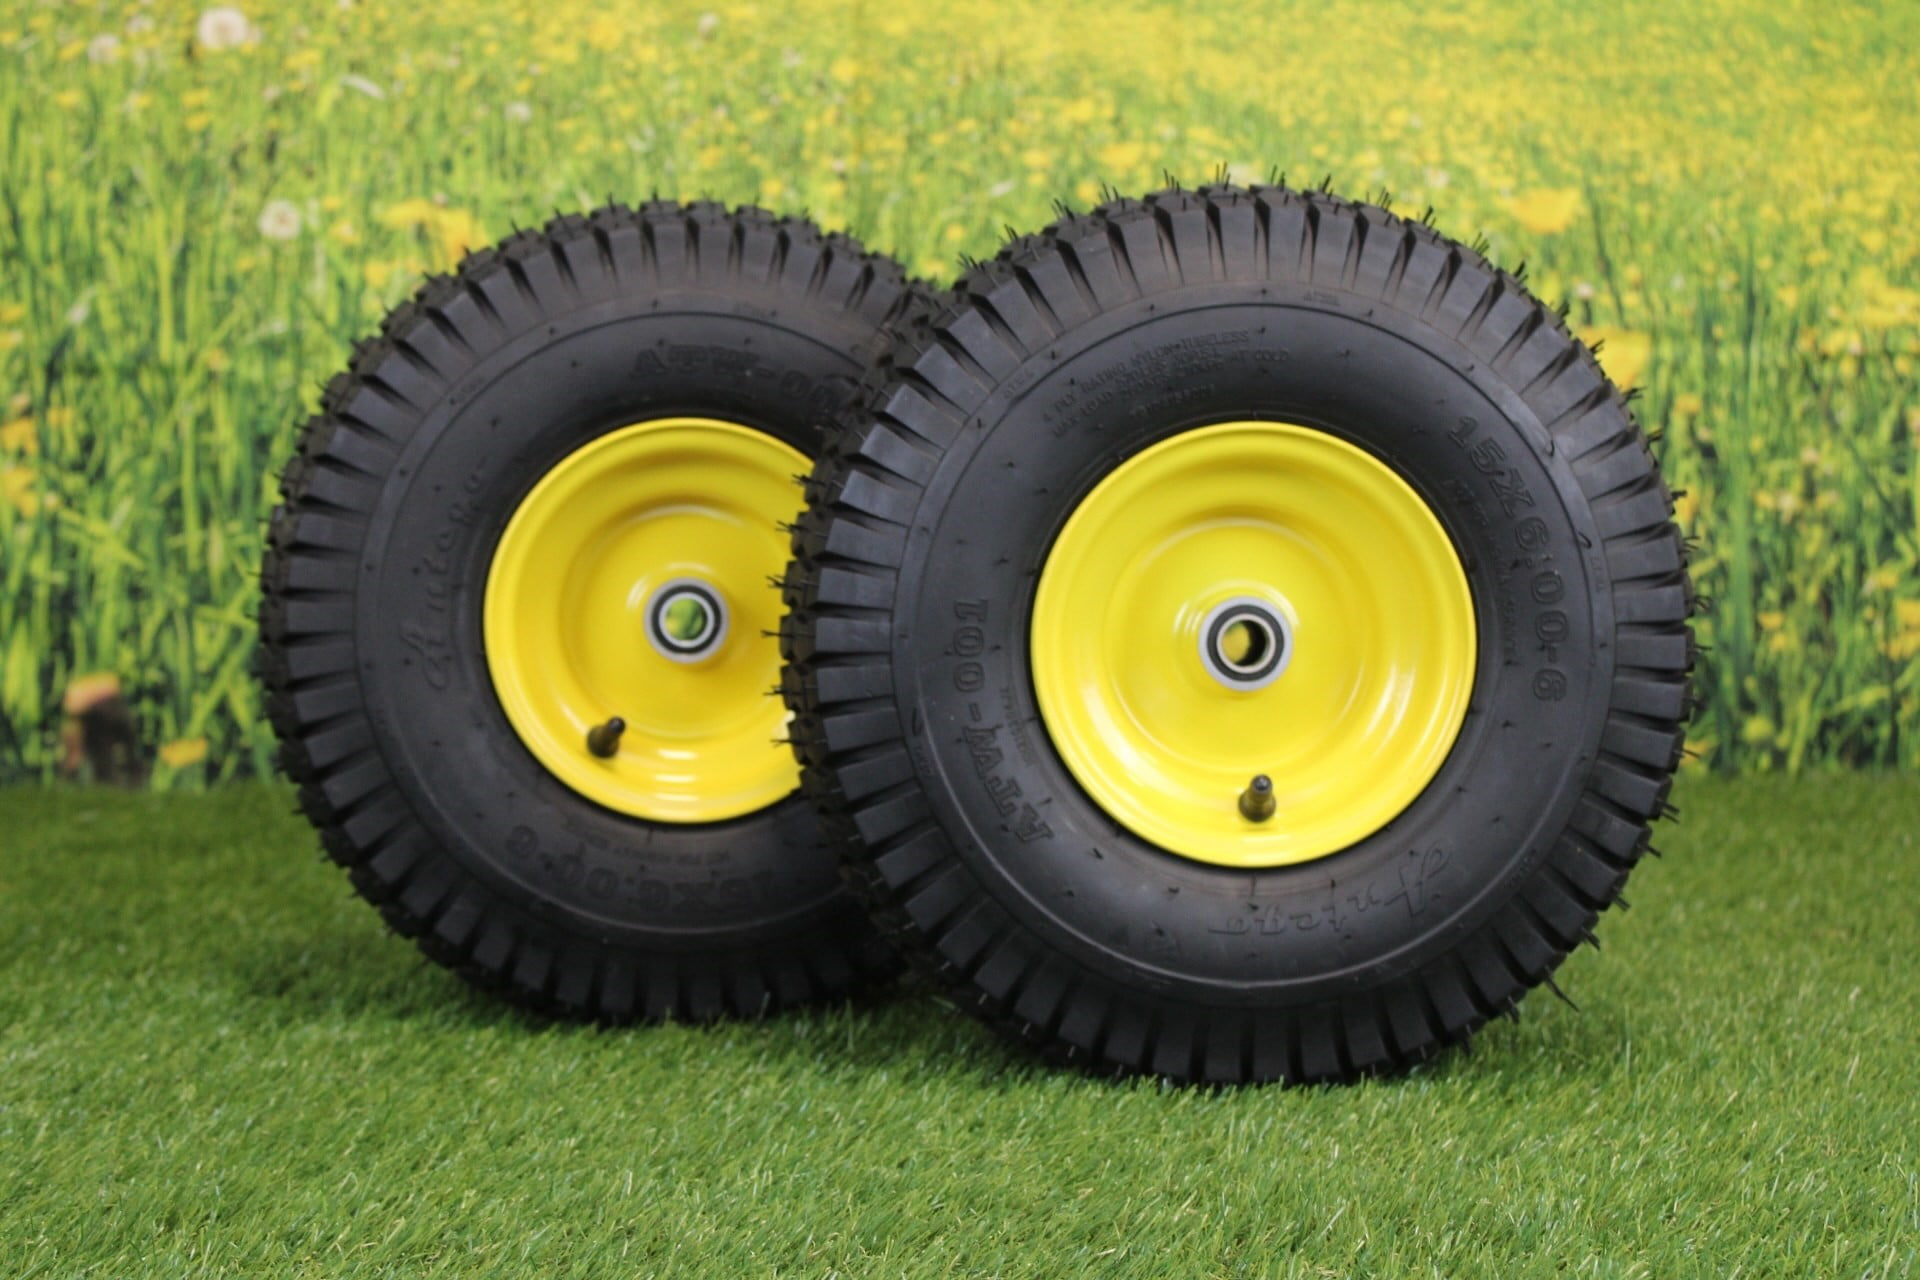 SET Of TWO 15X6X6 15X6.00-6 Soft Turf Tires Lawn Tractor Lawn Mower Riding Mower 